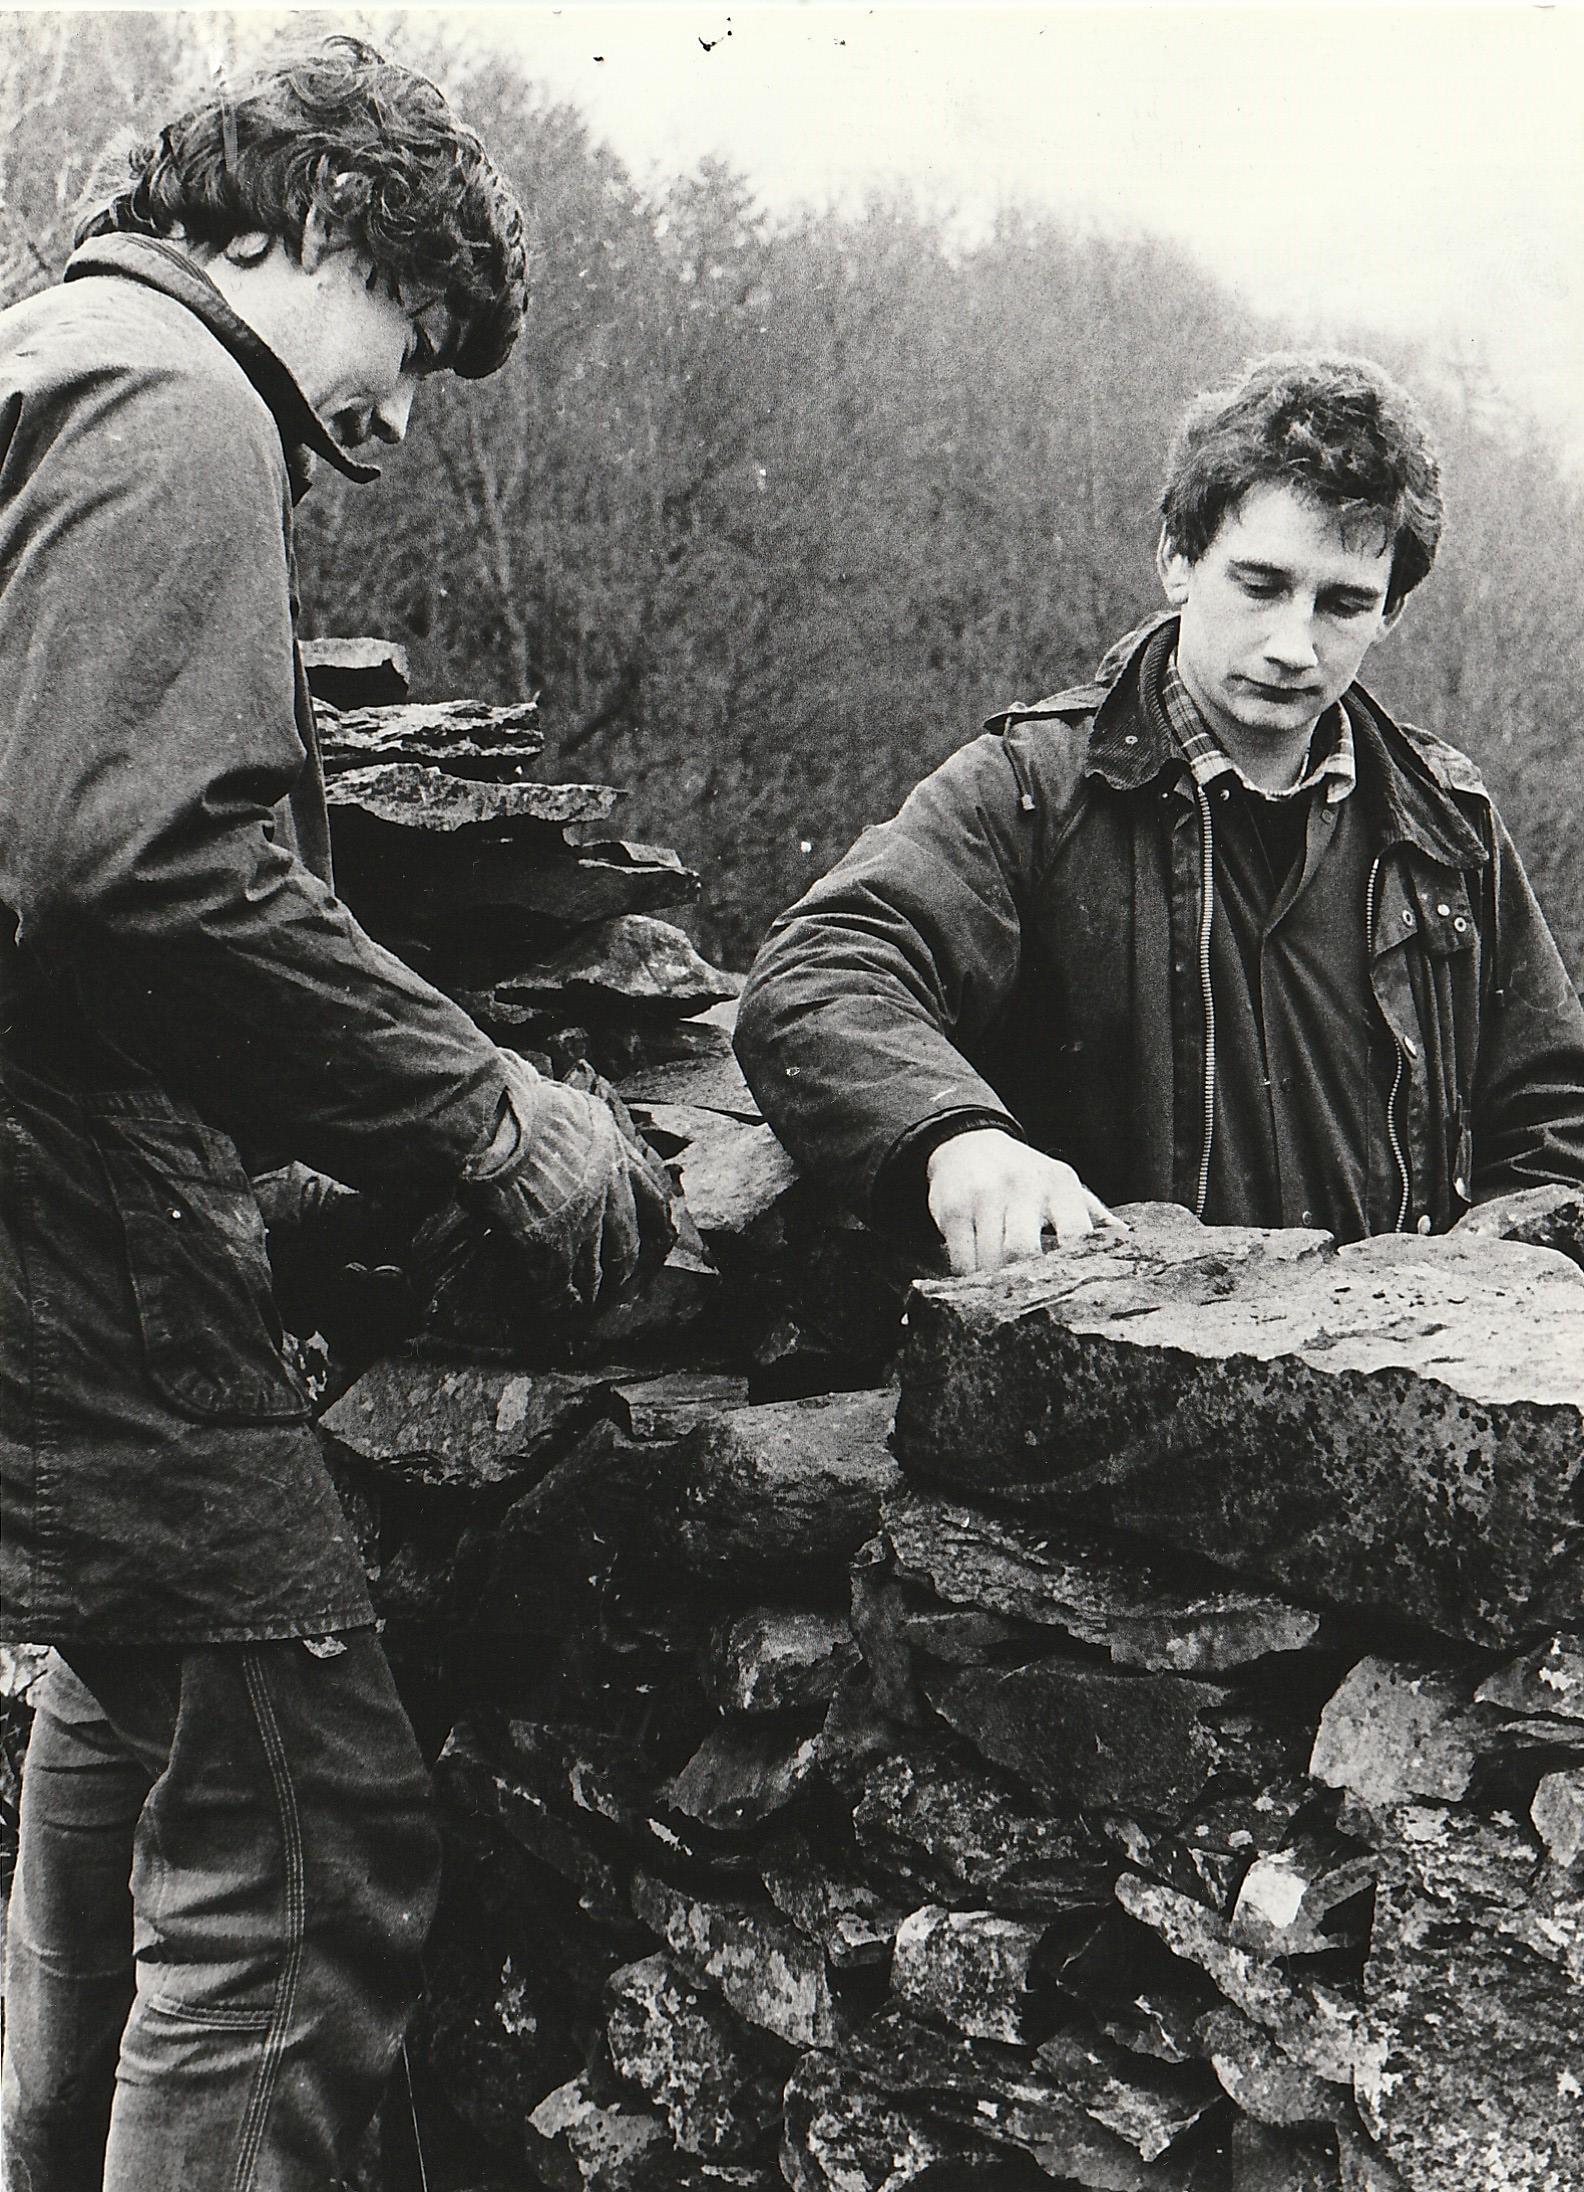 Walling work being carried out near Hawkshead in 1985 by National Trust woodmen David Woodburn (left) and Chris Taylforth